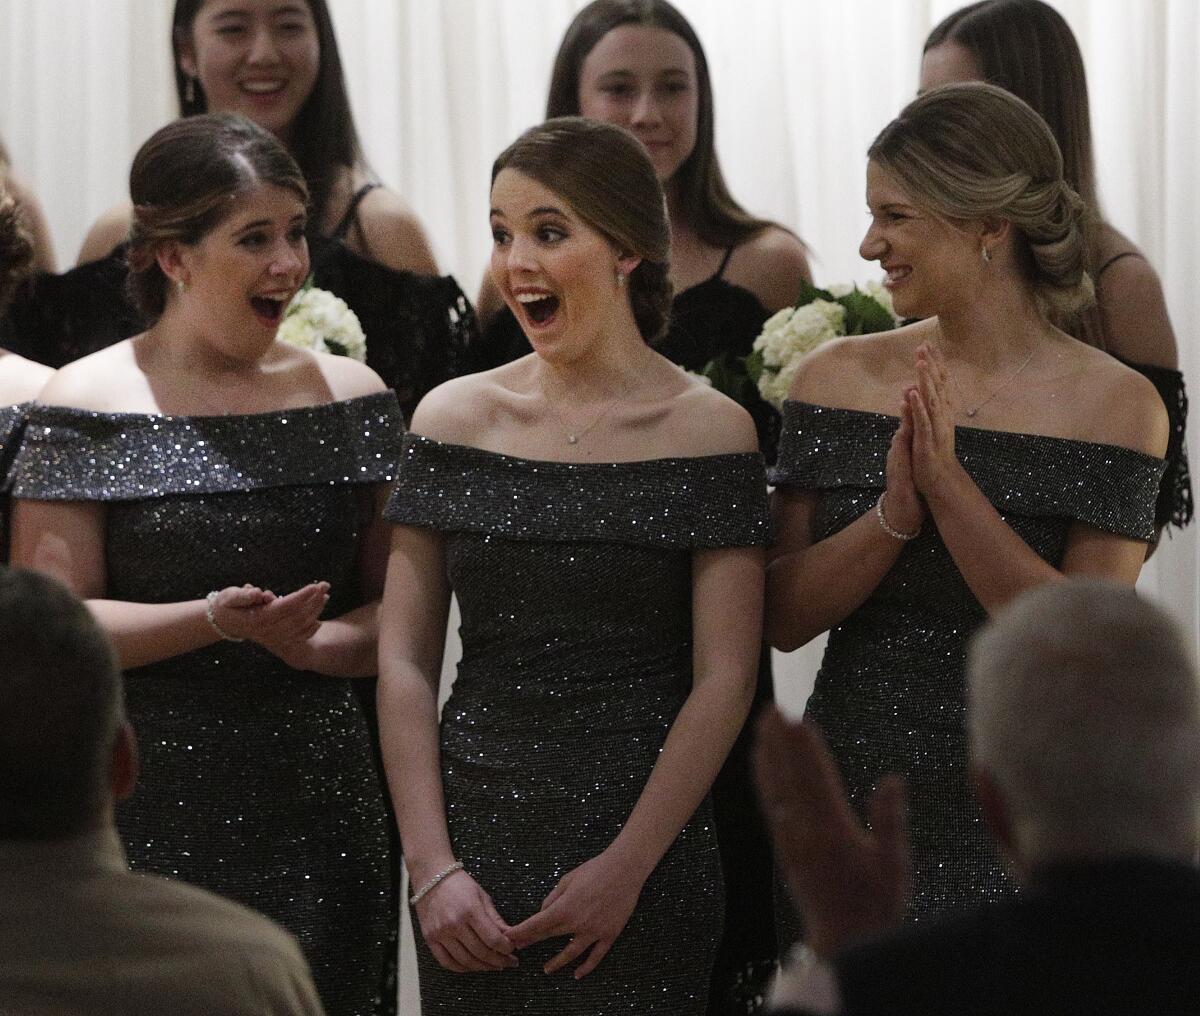 Ally Rayer reacts on being named 2020 Miss La Cañada Flintridge. She is surrounded by court members Audrey Melilo and Reese Ramseyer at the 108th Installation and Awards Gala at the La Cañada Flintridge Country Club on Jan. 30.